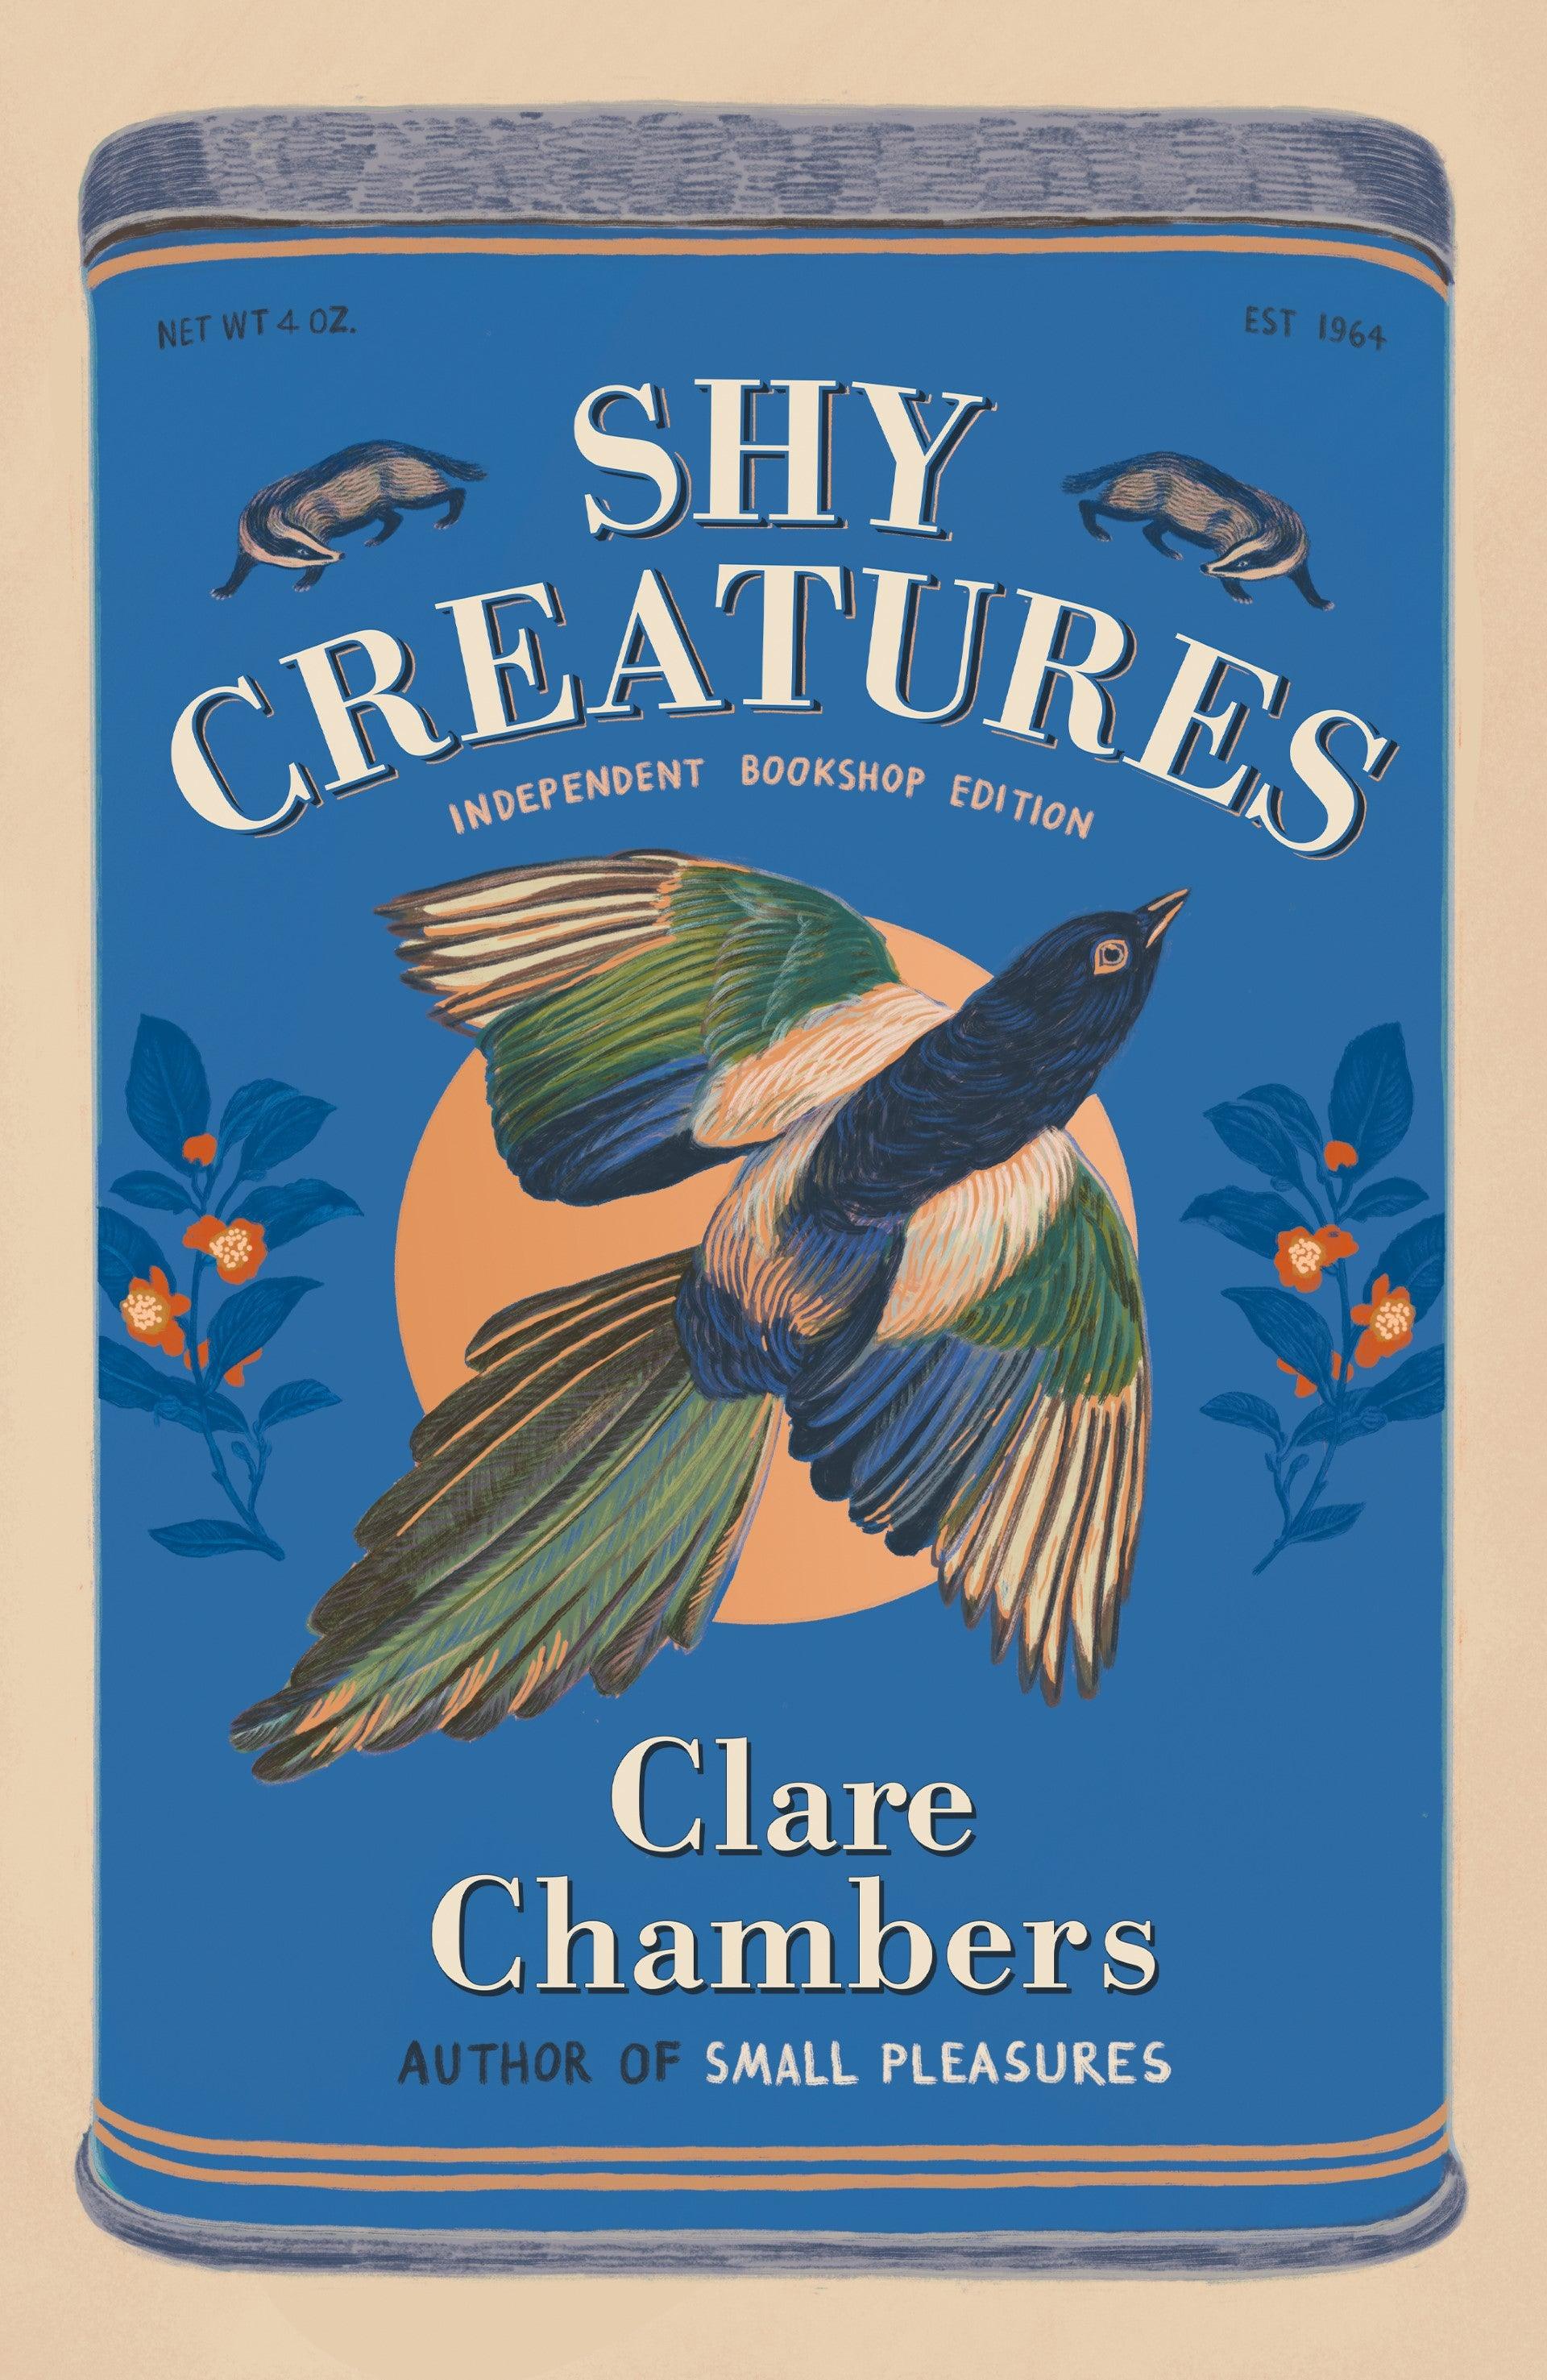 'Shy Creatures' by Clare Chambers - Signed Limited Edition - Pub. August 29th - The Cleeve Bookshop